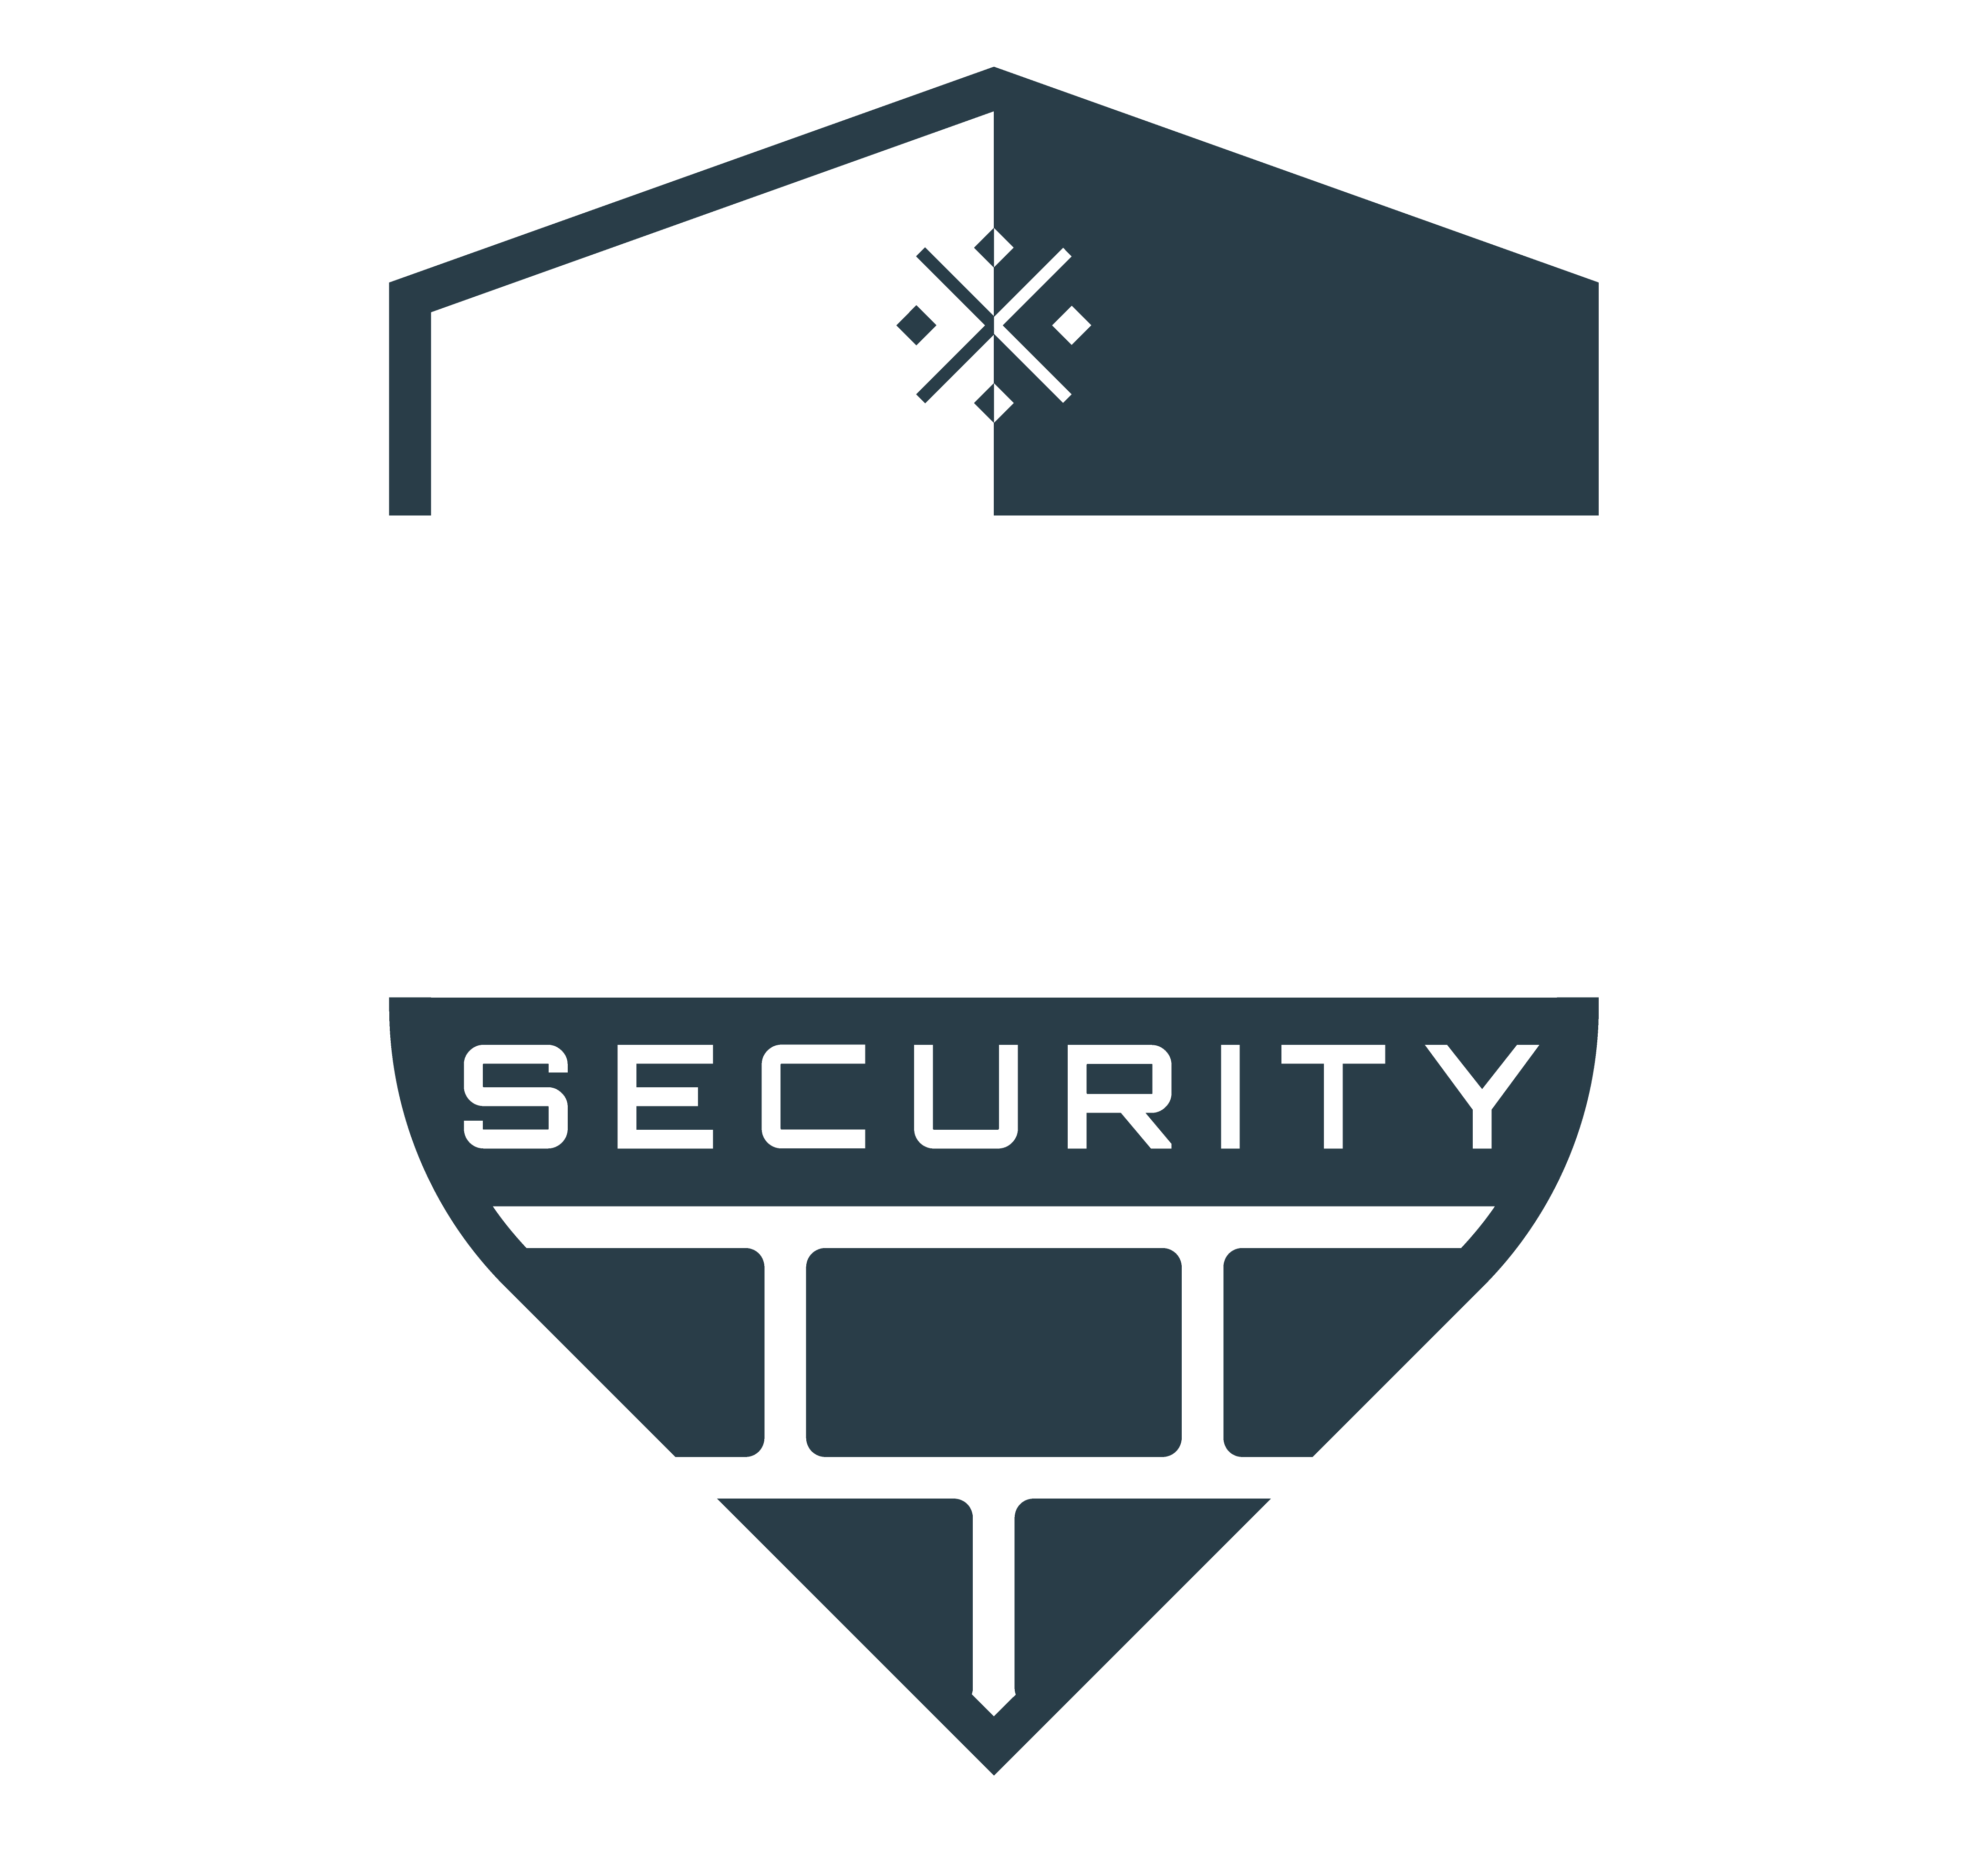 Seattle Security Services – Stonewall Security